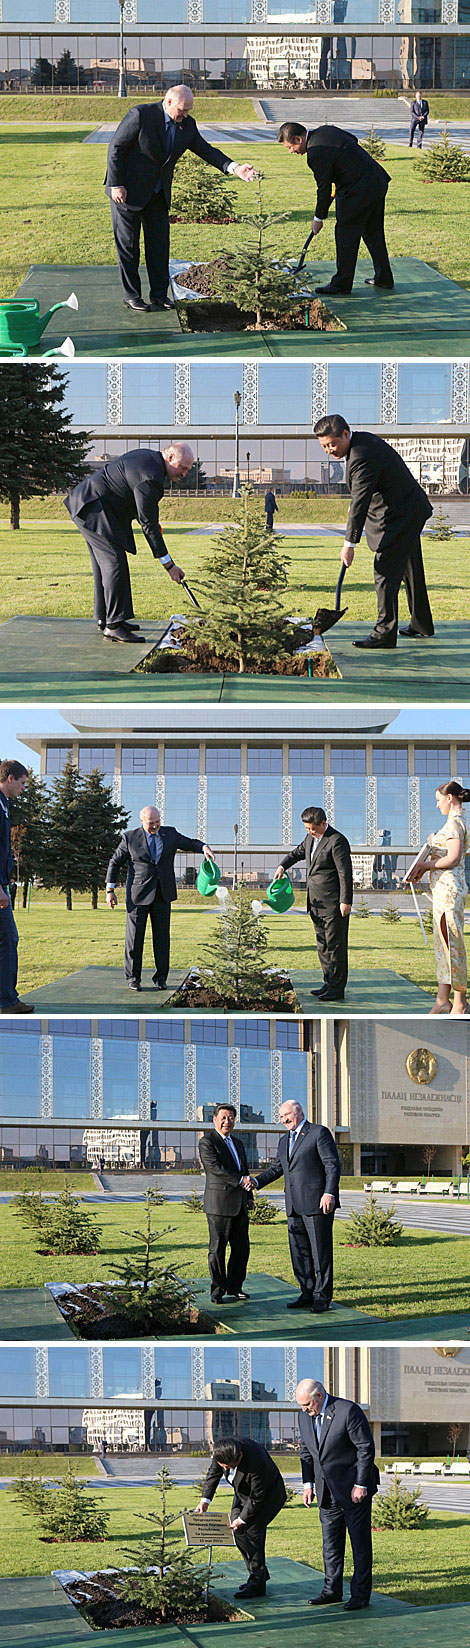 Xi Jinping planted a tree at the Alley of Honored Guests near the Independence Palace